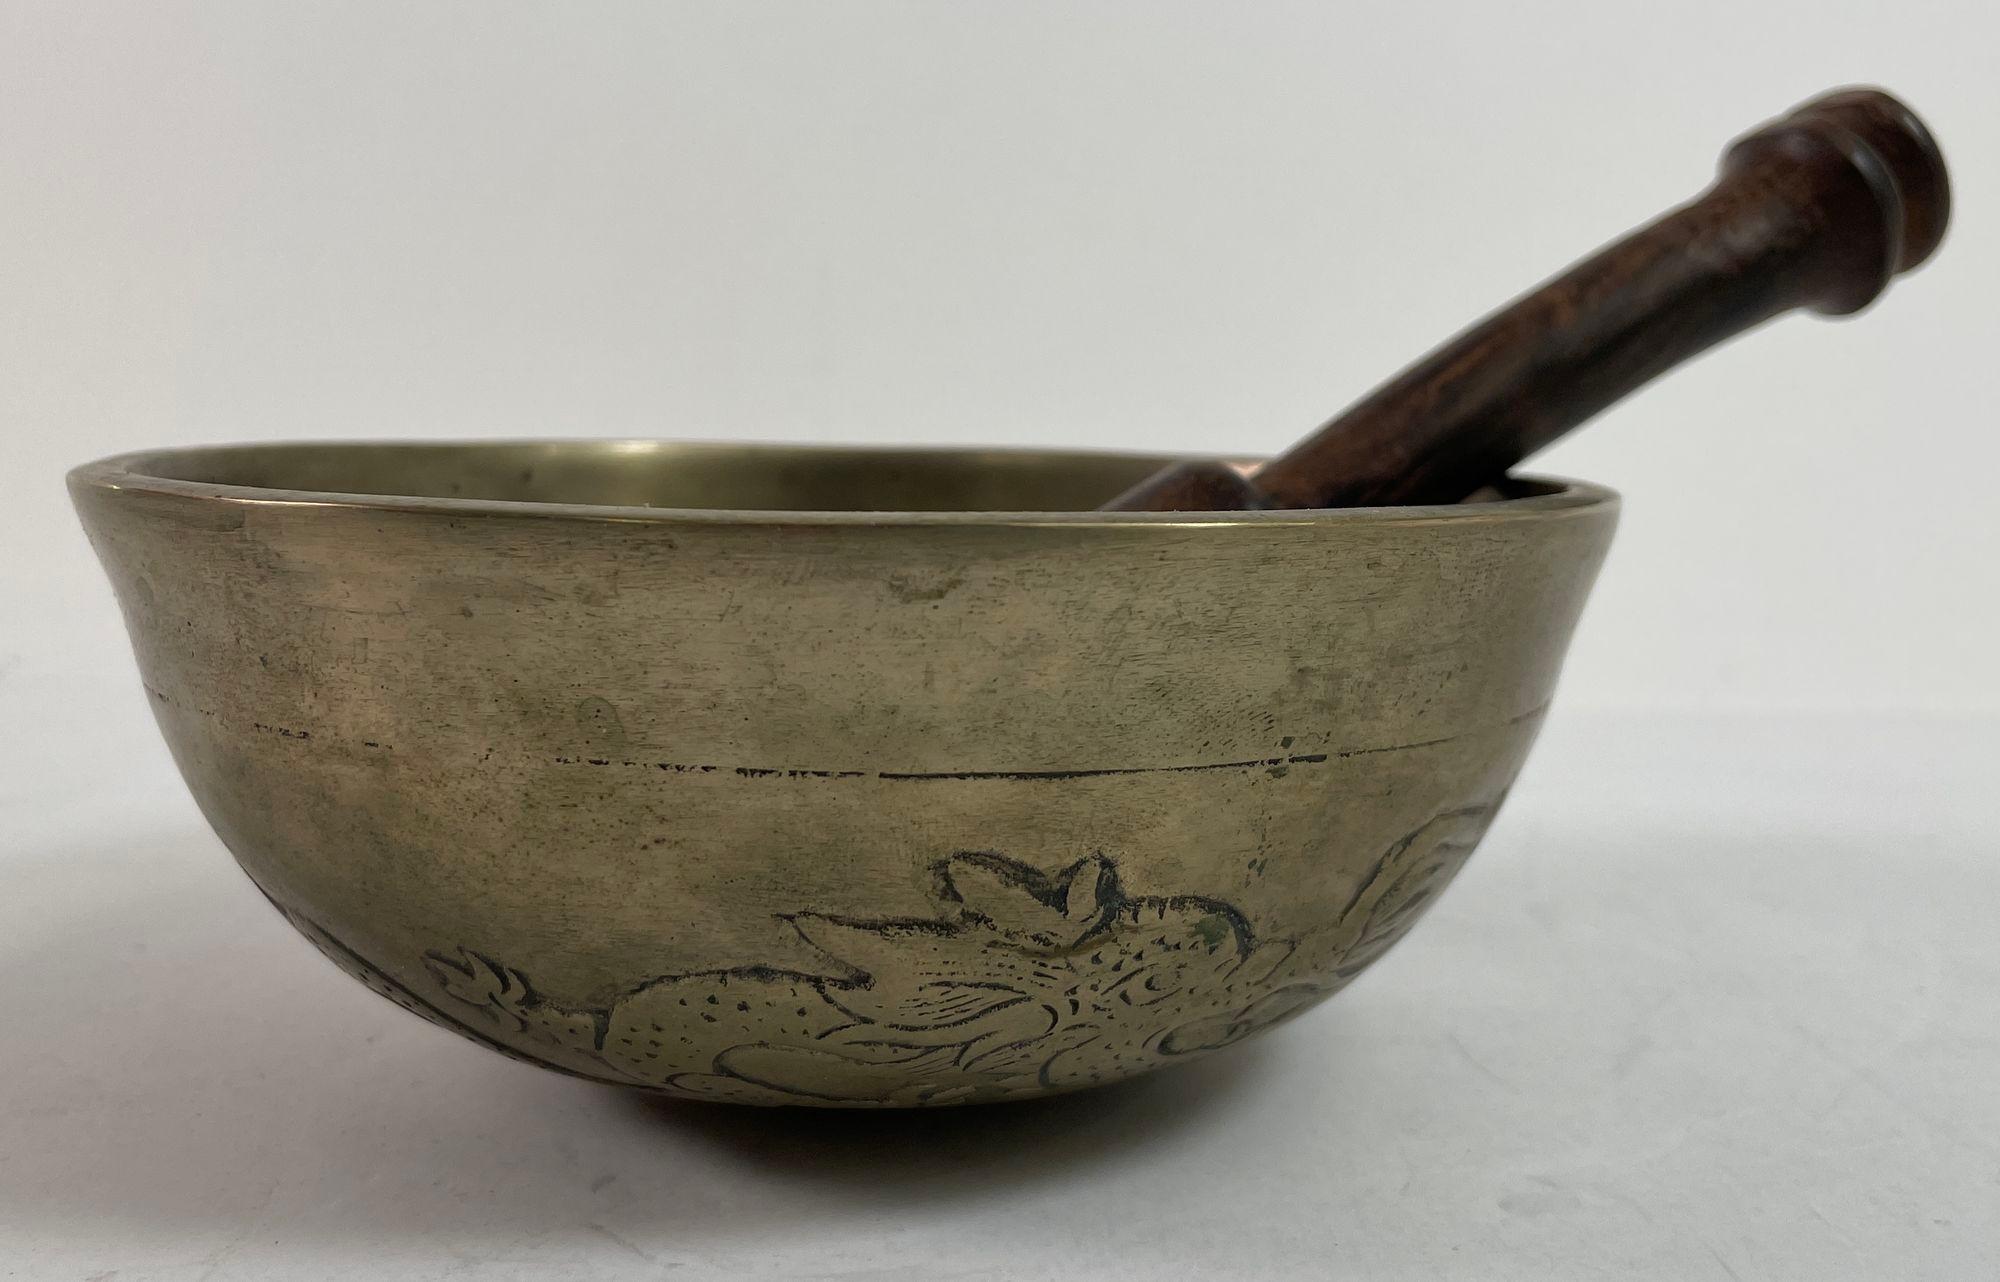 Hammered Brass Singing Bowl with Dragons Nepal 1950s.
Asian Chinese Bronze Vessel Dragon Bowl.
Featuring magnificent pictorials of 2 dragons in raised low relief around the vessel.
A special piece so collectible.
Made from bronze, a good heavy